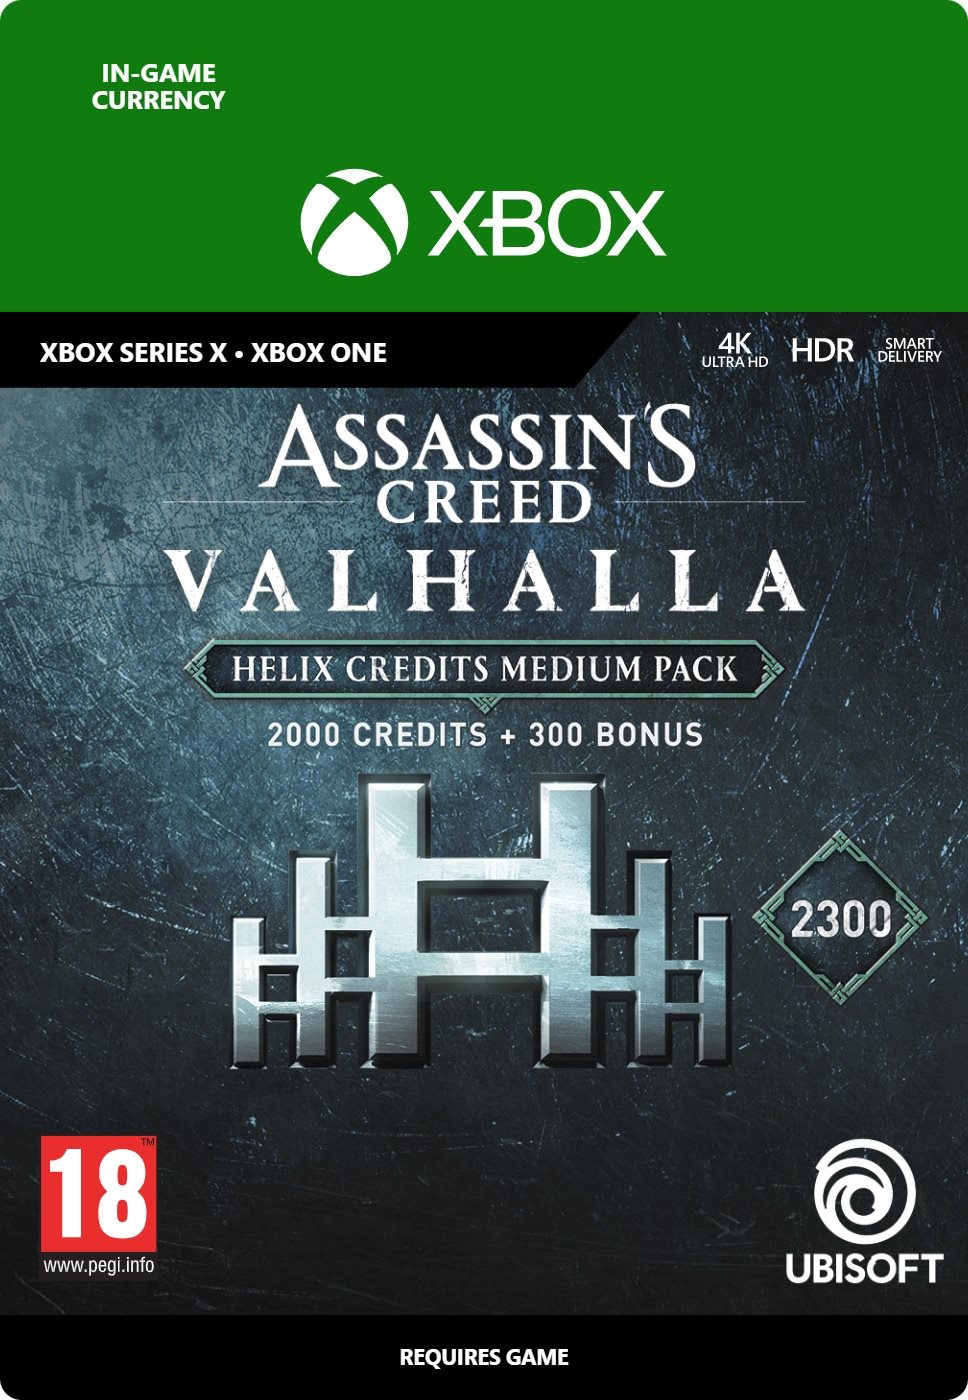 Assassins Creed Valhalla: 2300 Helix Credits Pack - Xbox One Digital